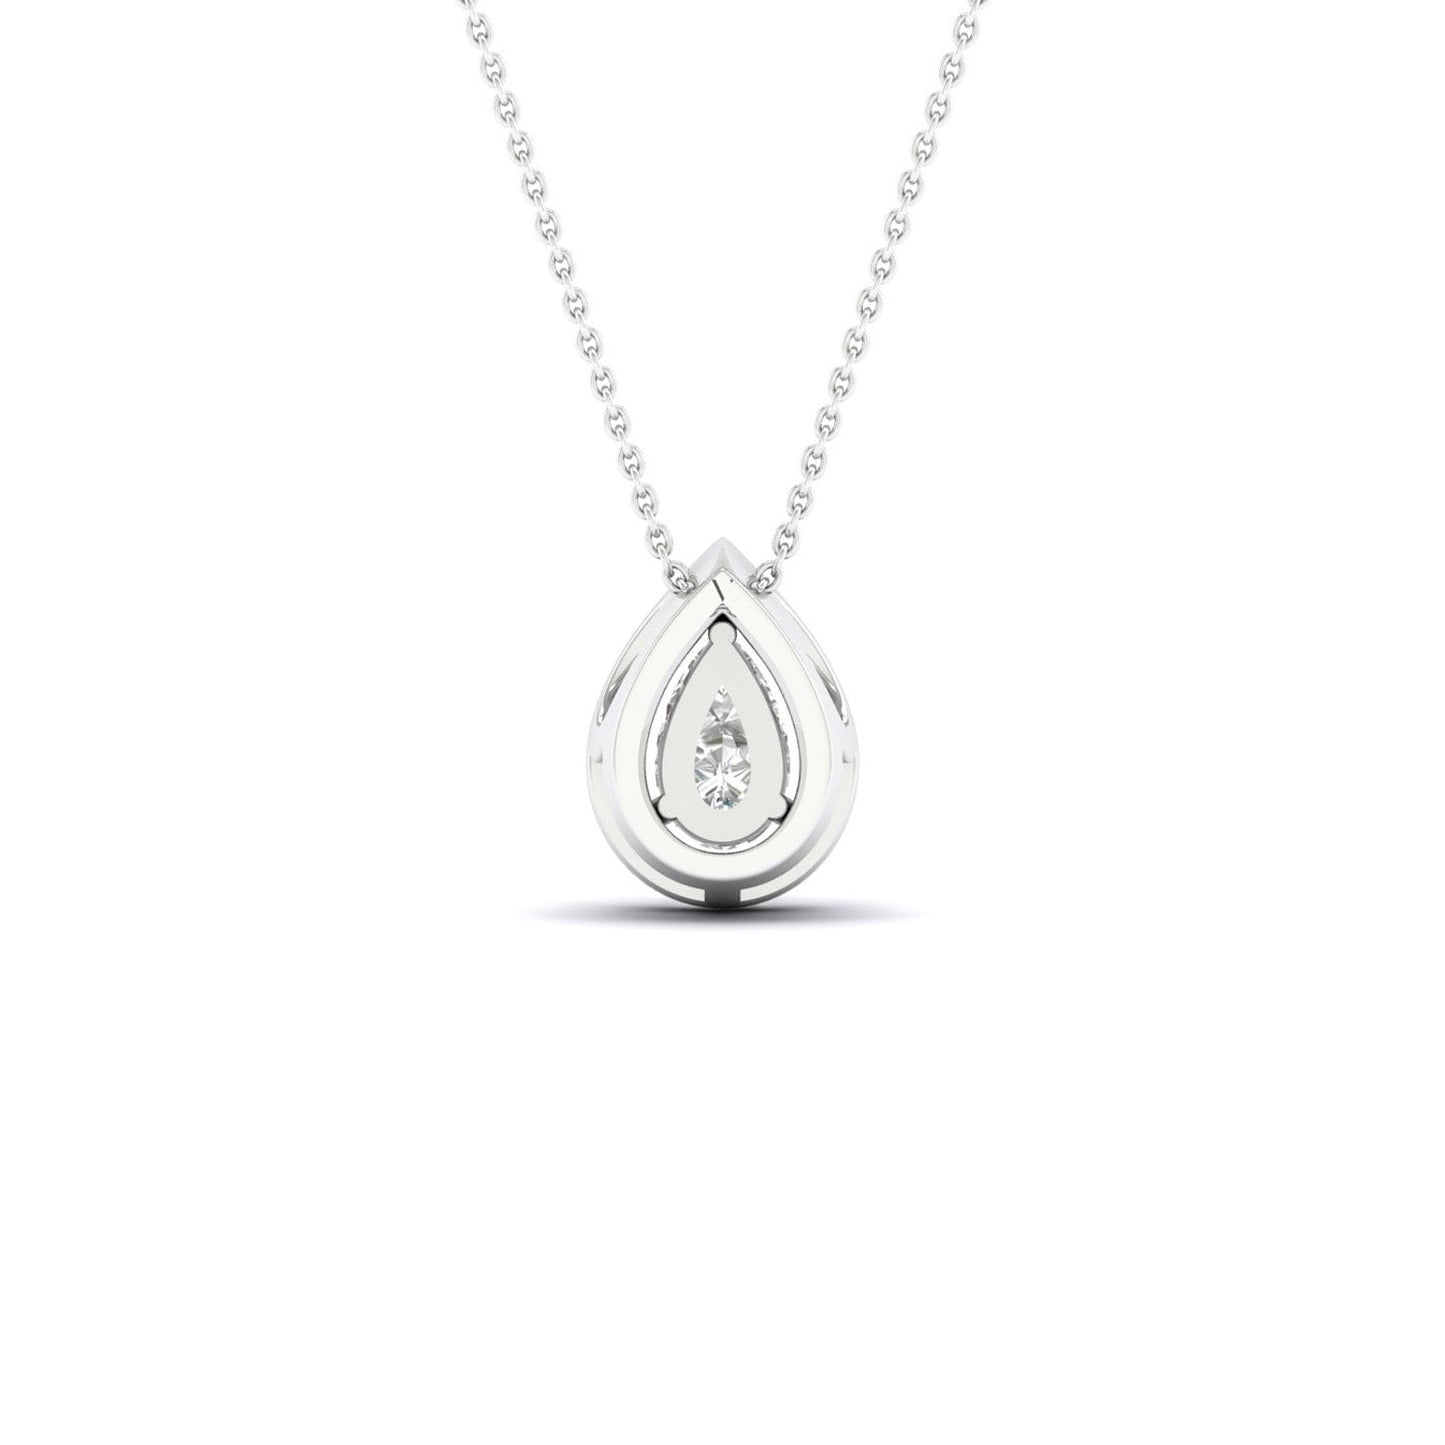 Petite Dewdrop Halo Necklace_Product angle_1/6 Ct. - 3